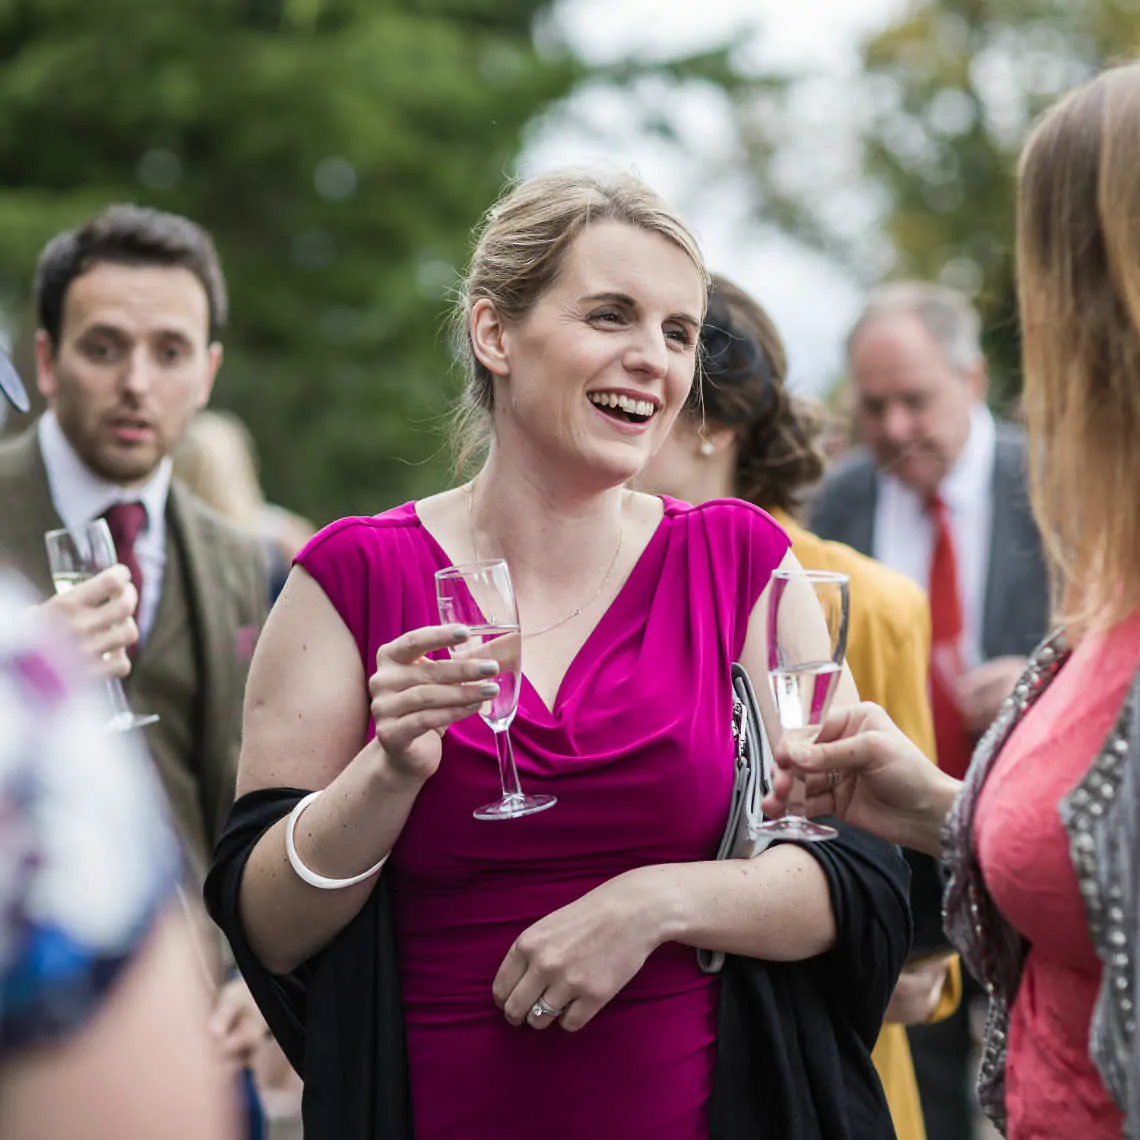 Lady laughing at outdoor drinks reception